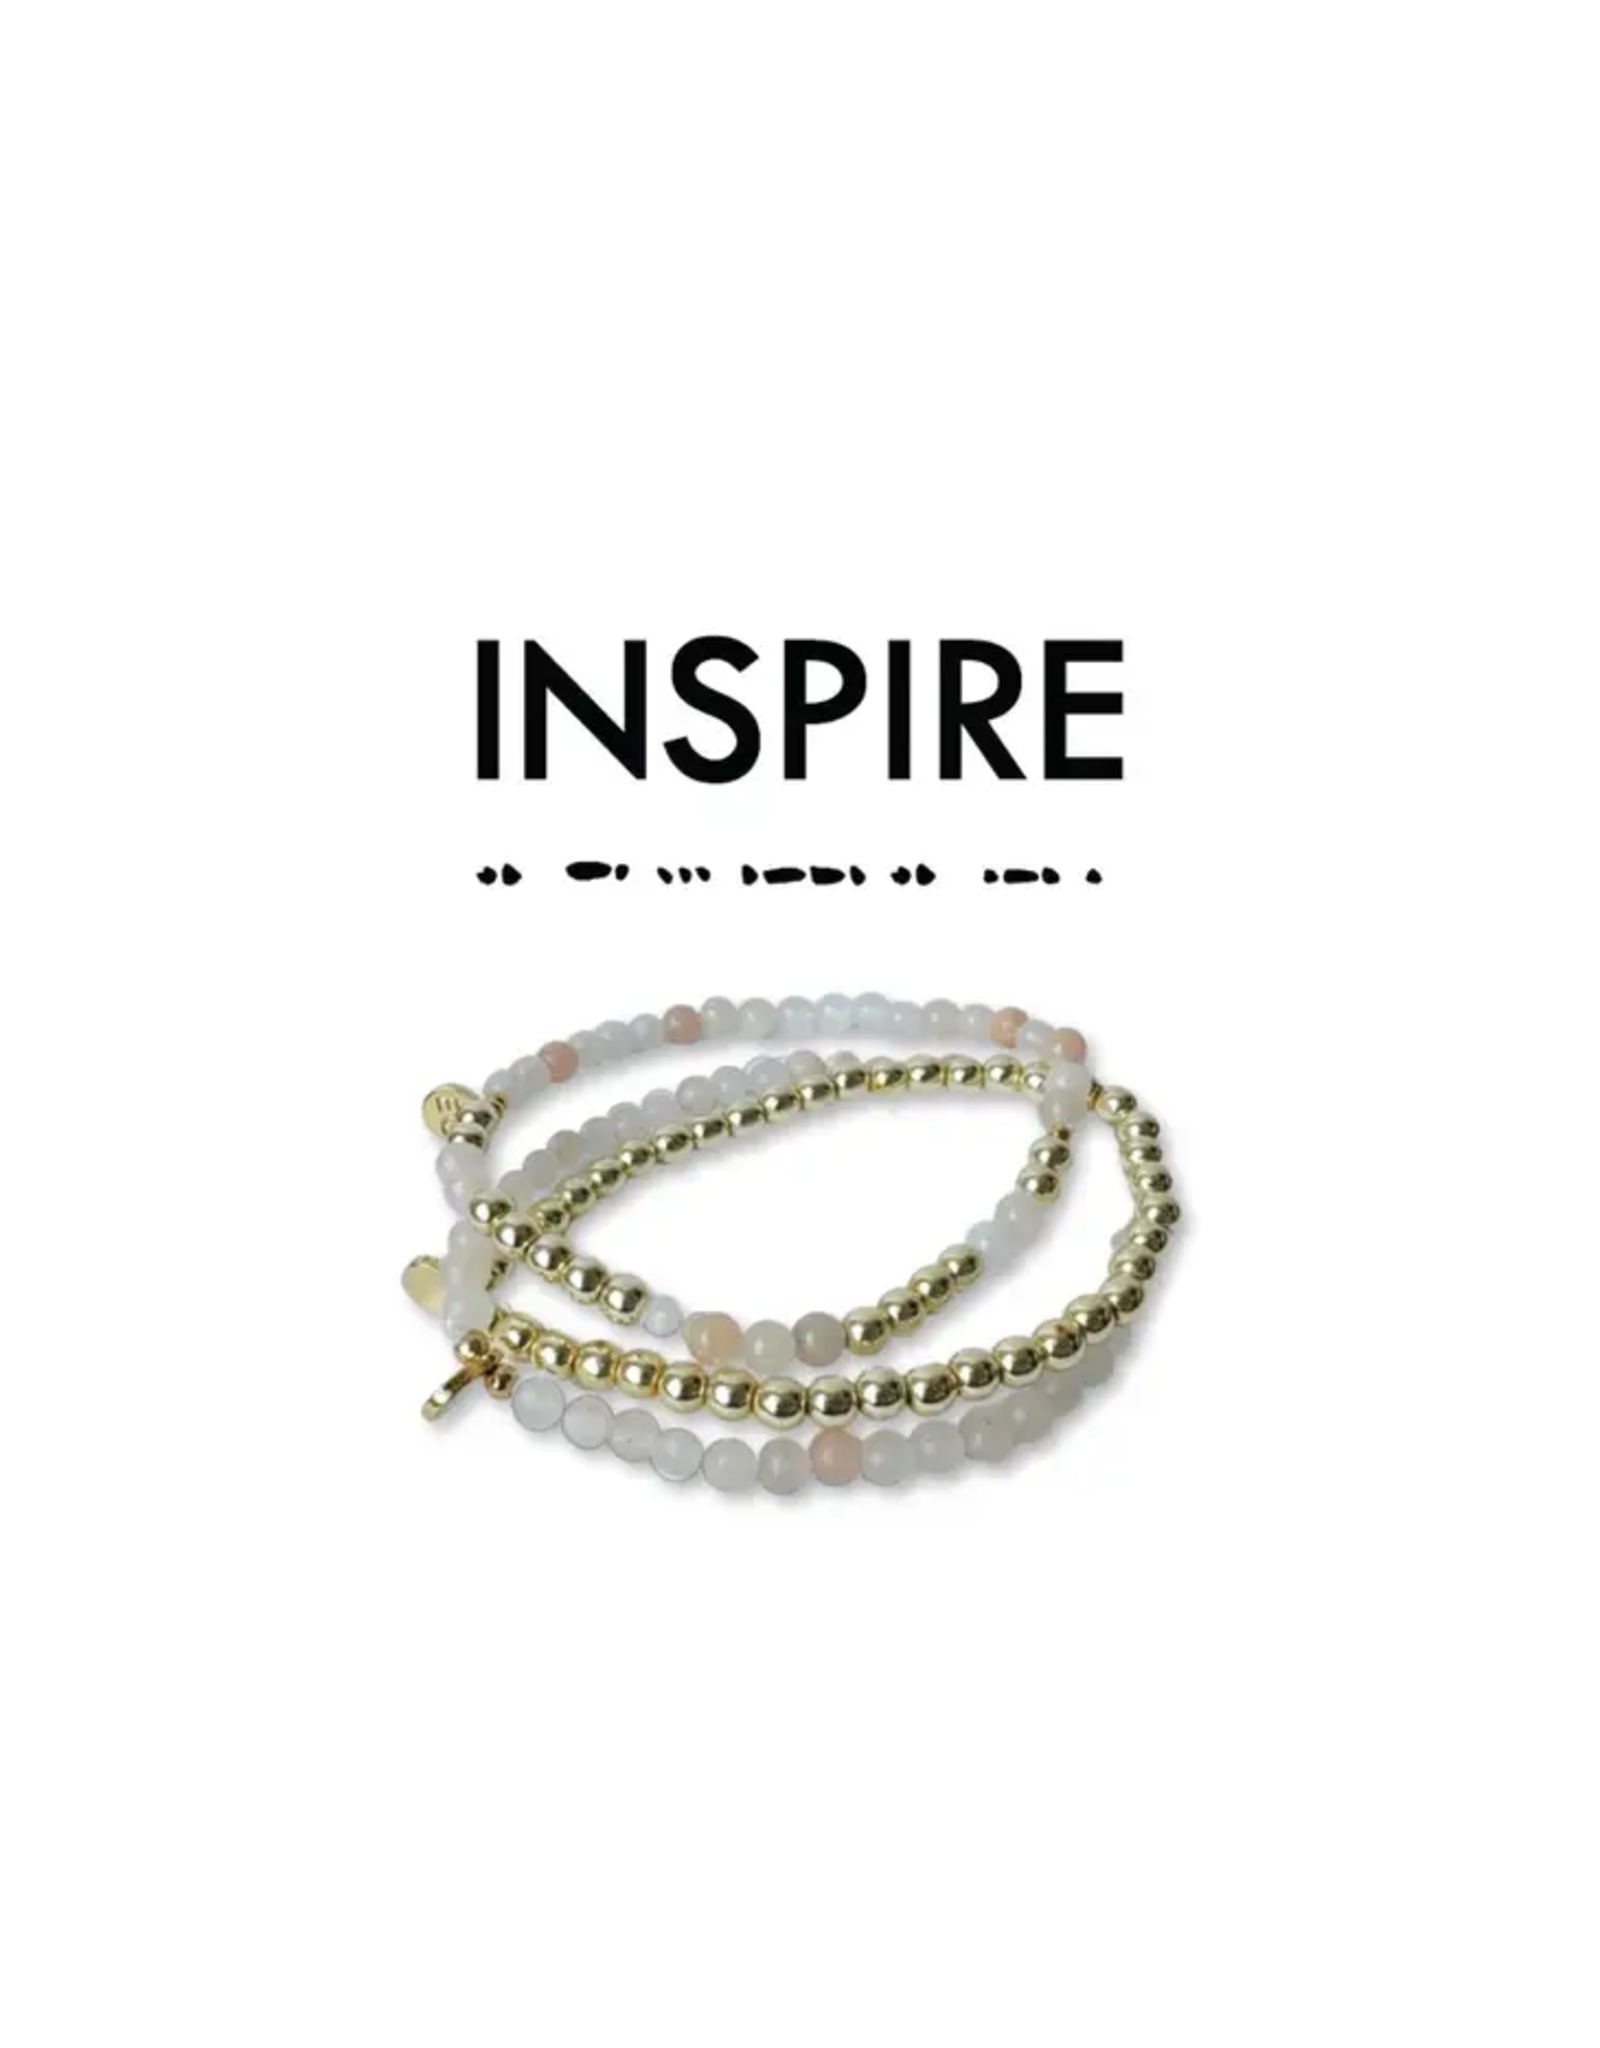 Trade roots Morse Code Stacking Bracelet, Thailand Inspire